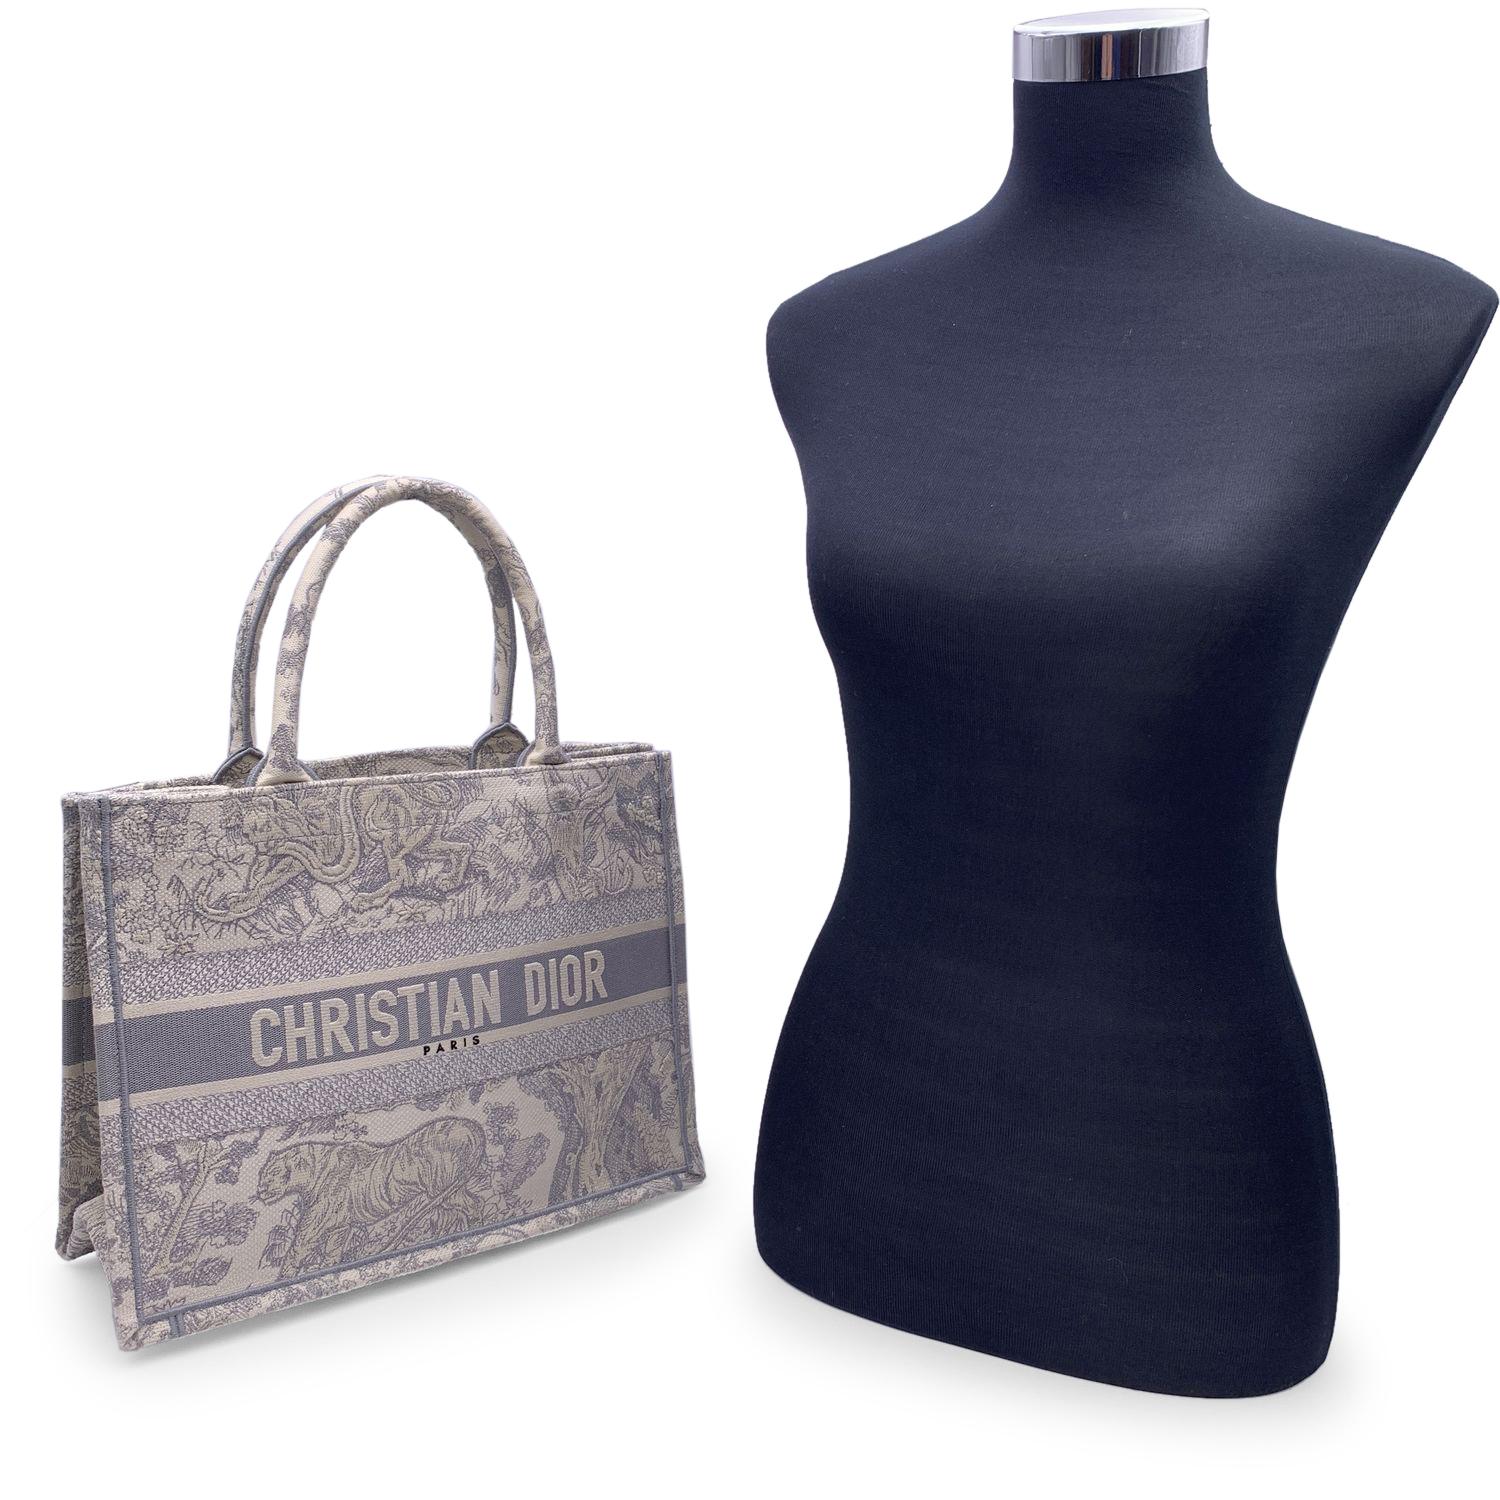 This beautiful Bag will come with a Certificate of Authenticity provided by Entrupy. The certificate will be provided at no further cost

Iconic Christian Dior grey jacquard Toile de jouy 'Book Tote', Medium size. This is the Medium size. The Toile